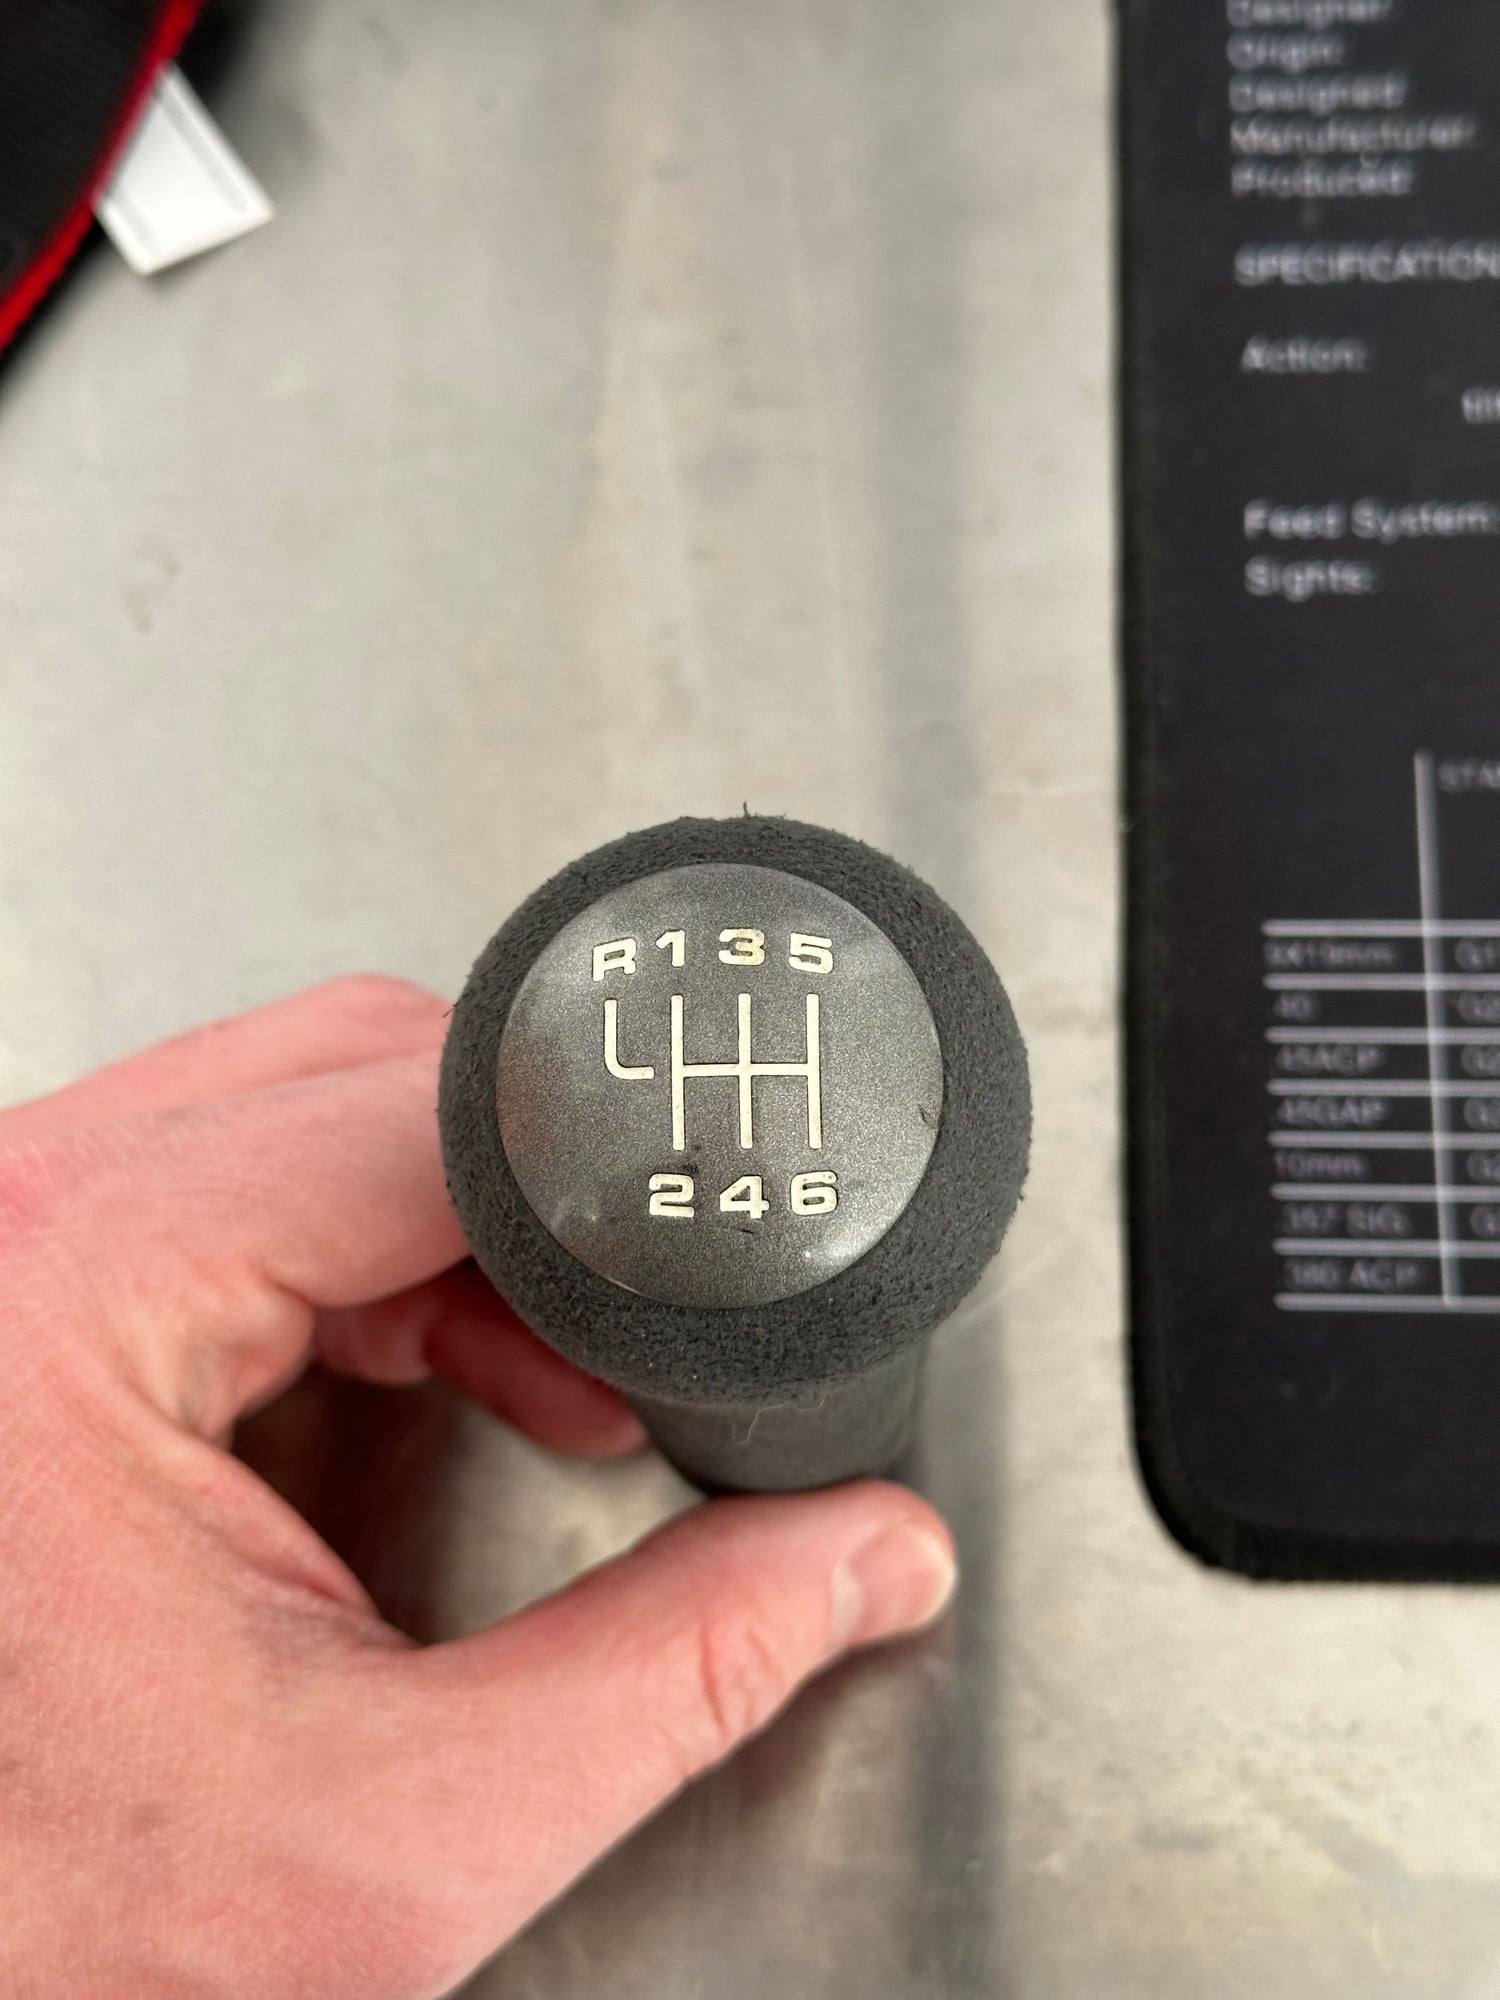 2010 Porsche GT3 - Shift knob and boot - Interior/Upholstery - $200 - Eagle, ID 83616, United States